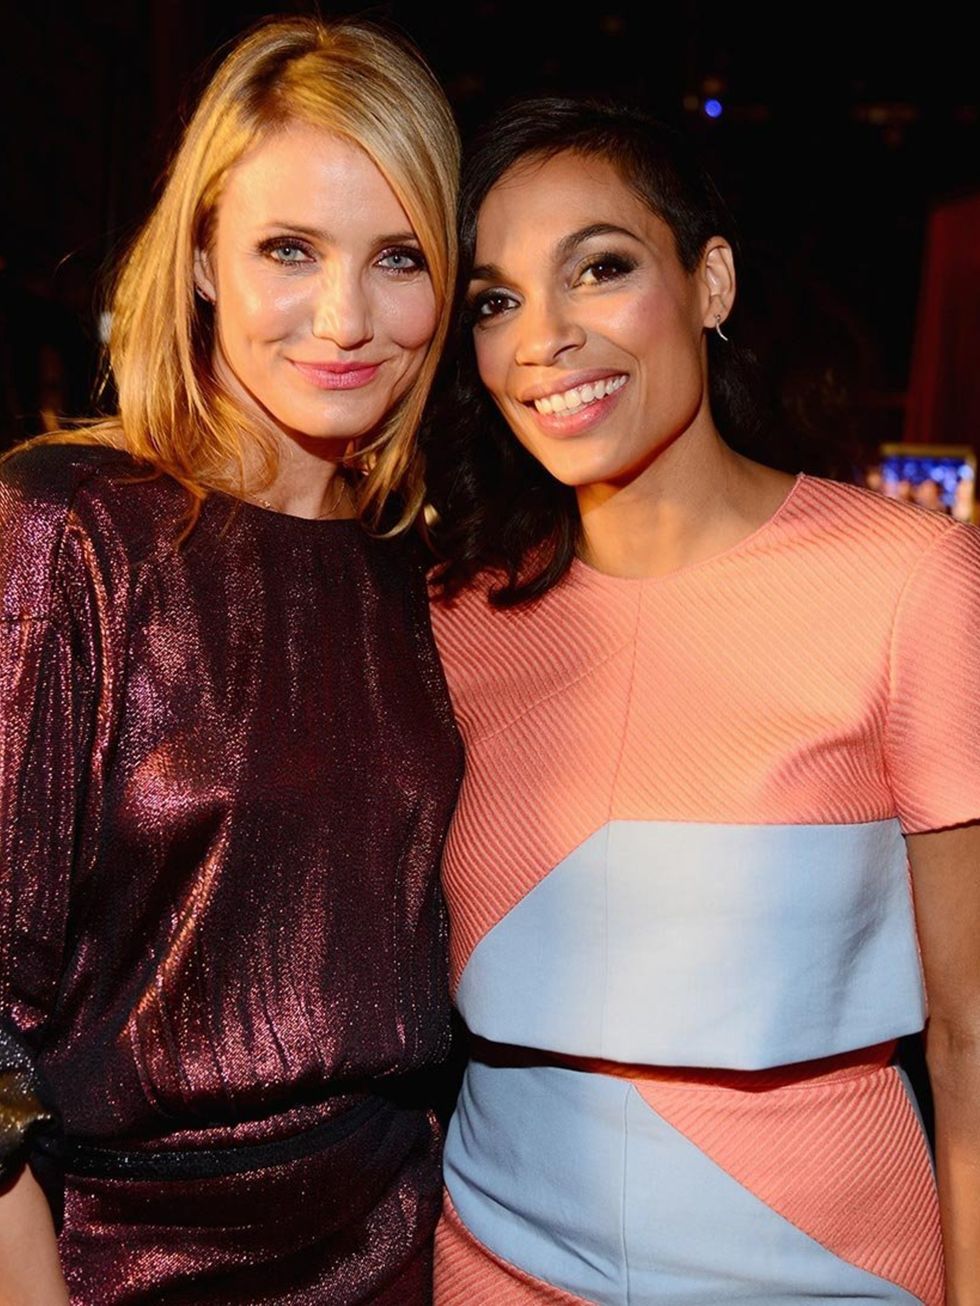 <p><a href="http://www.elleuk.com/star-style/celebrity-style-files/cameron-diaz">Cameron Diaz</a> and Rosario Dawson backstage at the Spike TV's Guys Choice 2014 awards.</p>